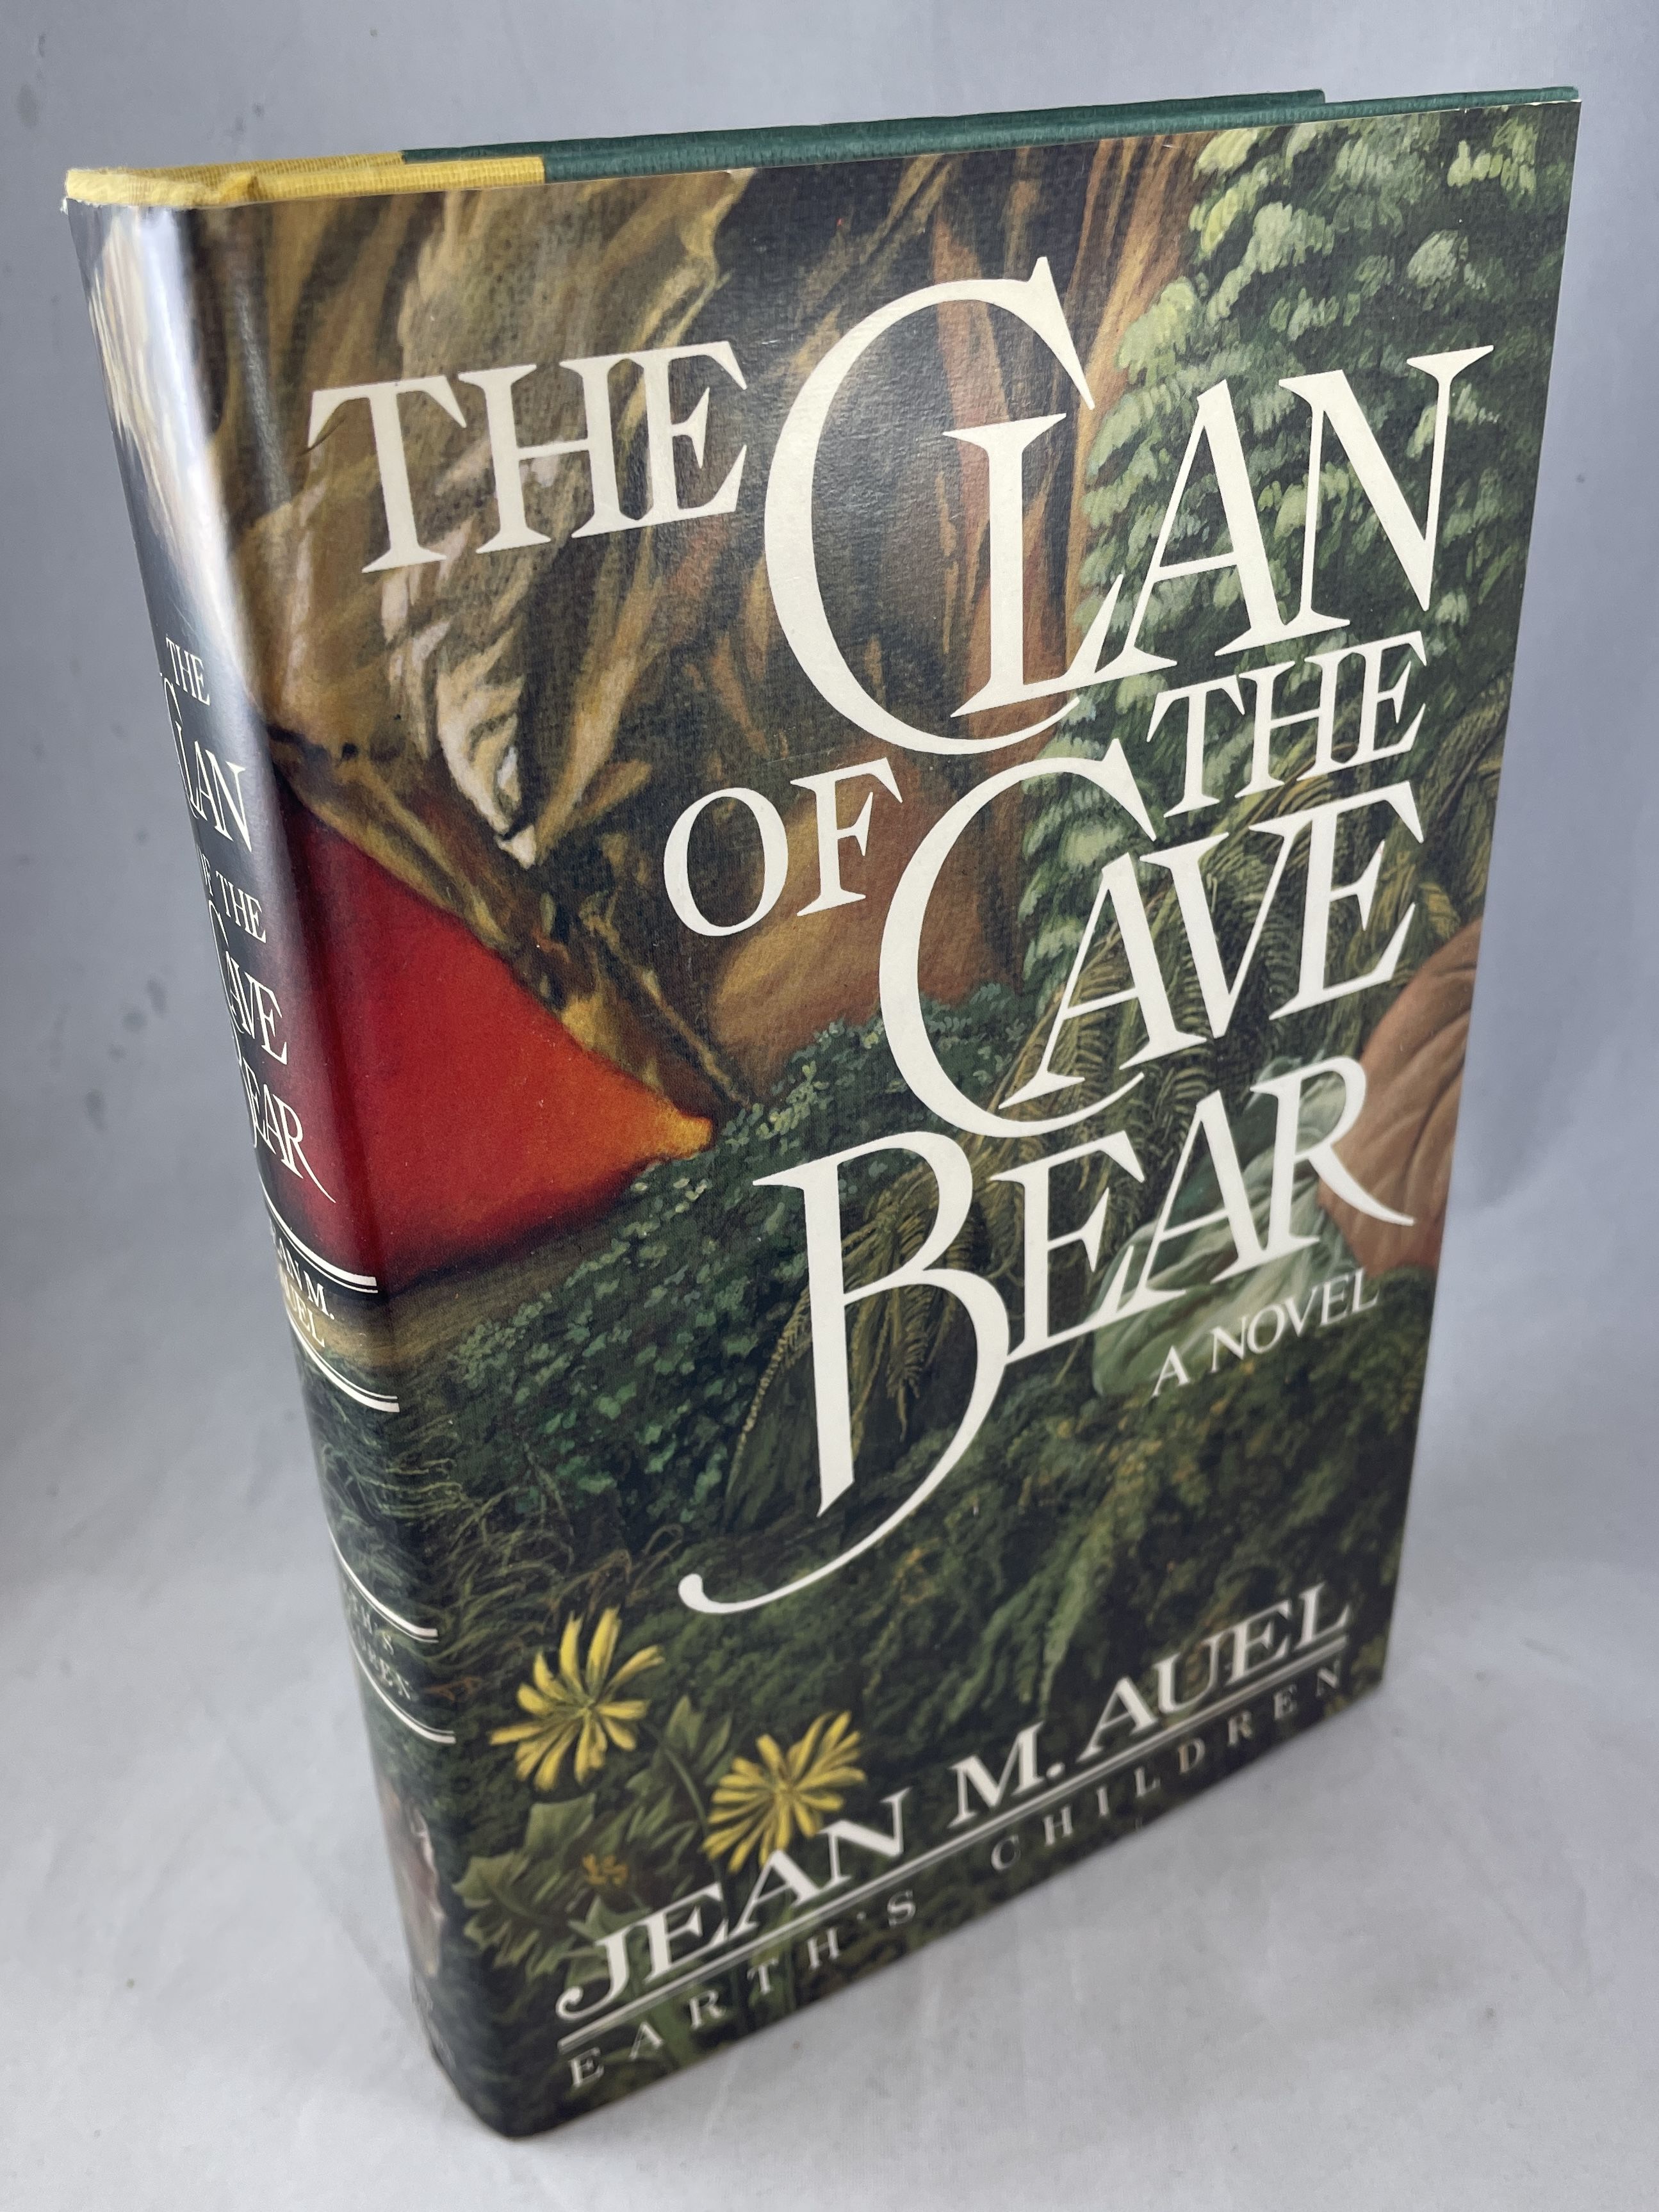 celines perez recommends clan of the cave bear rape pic